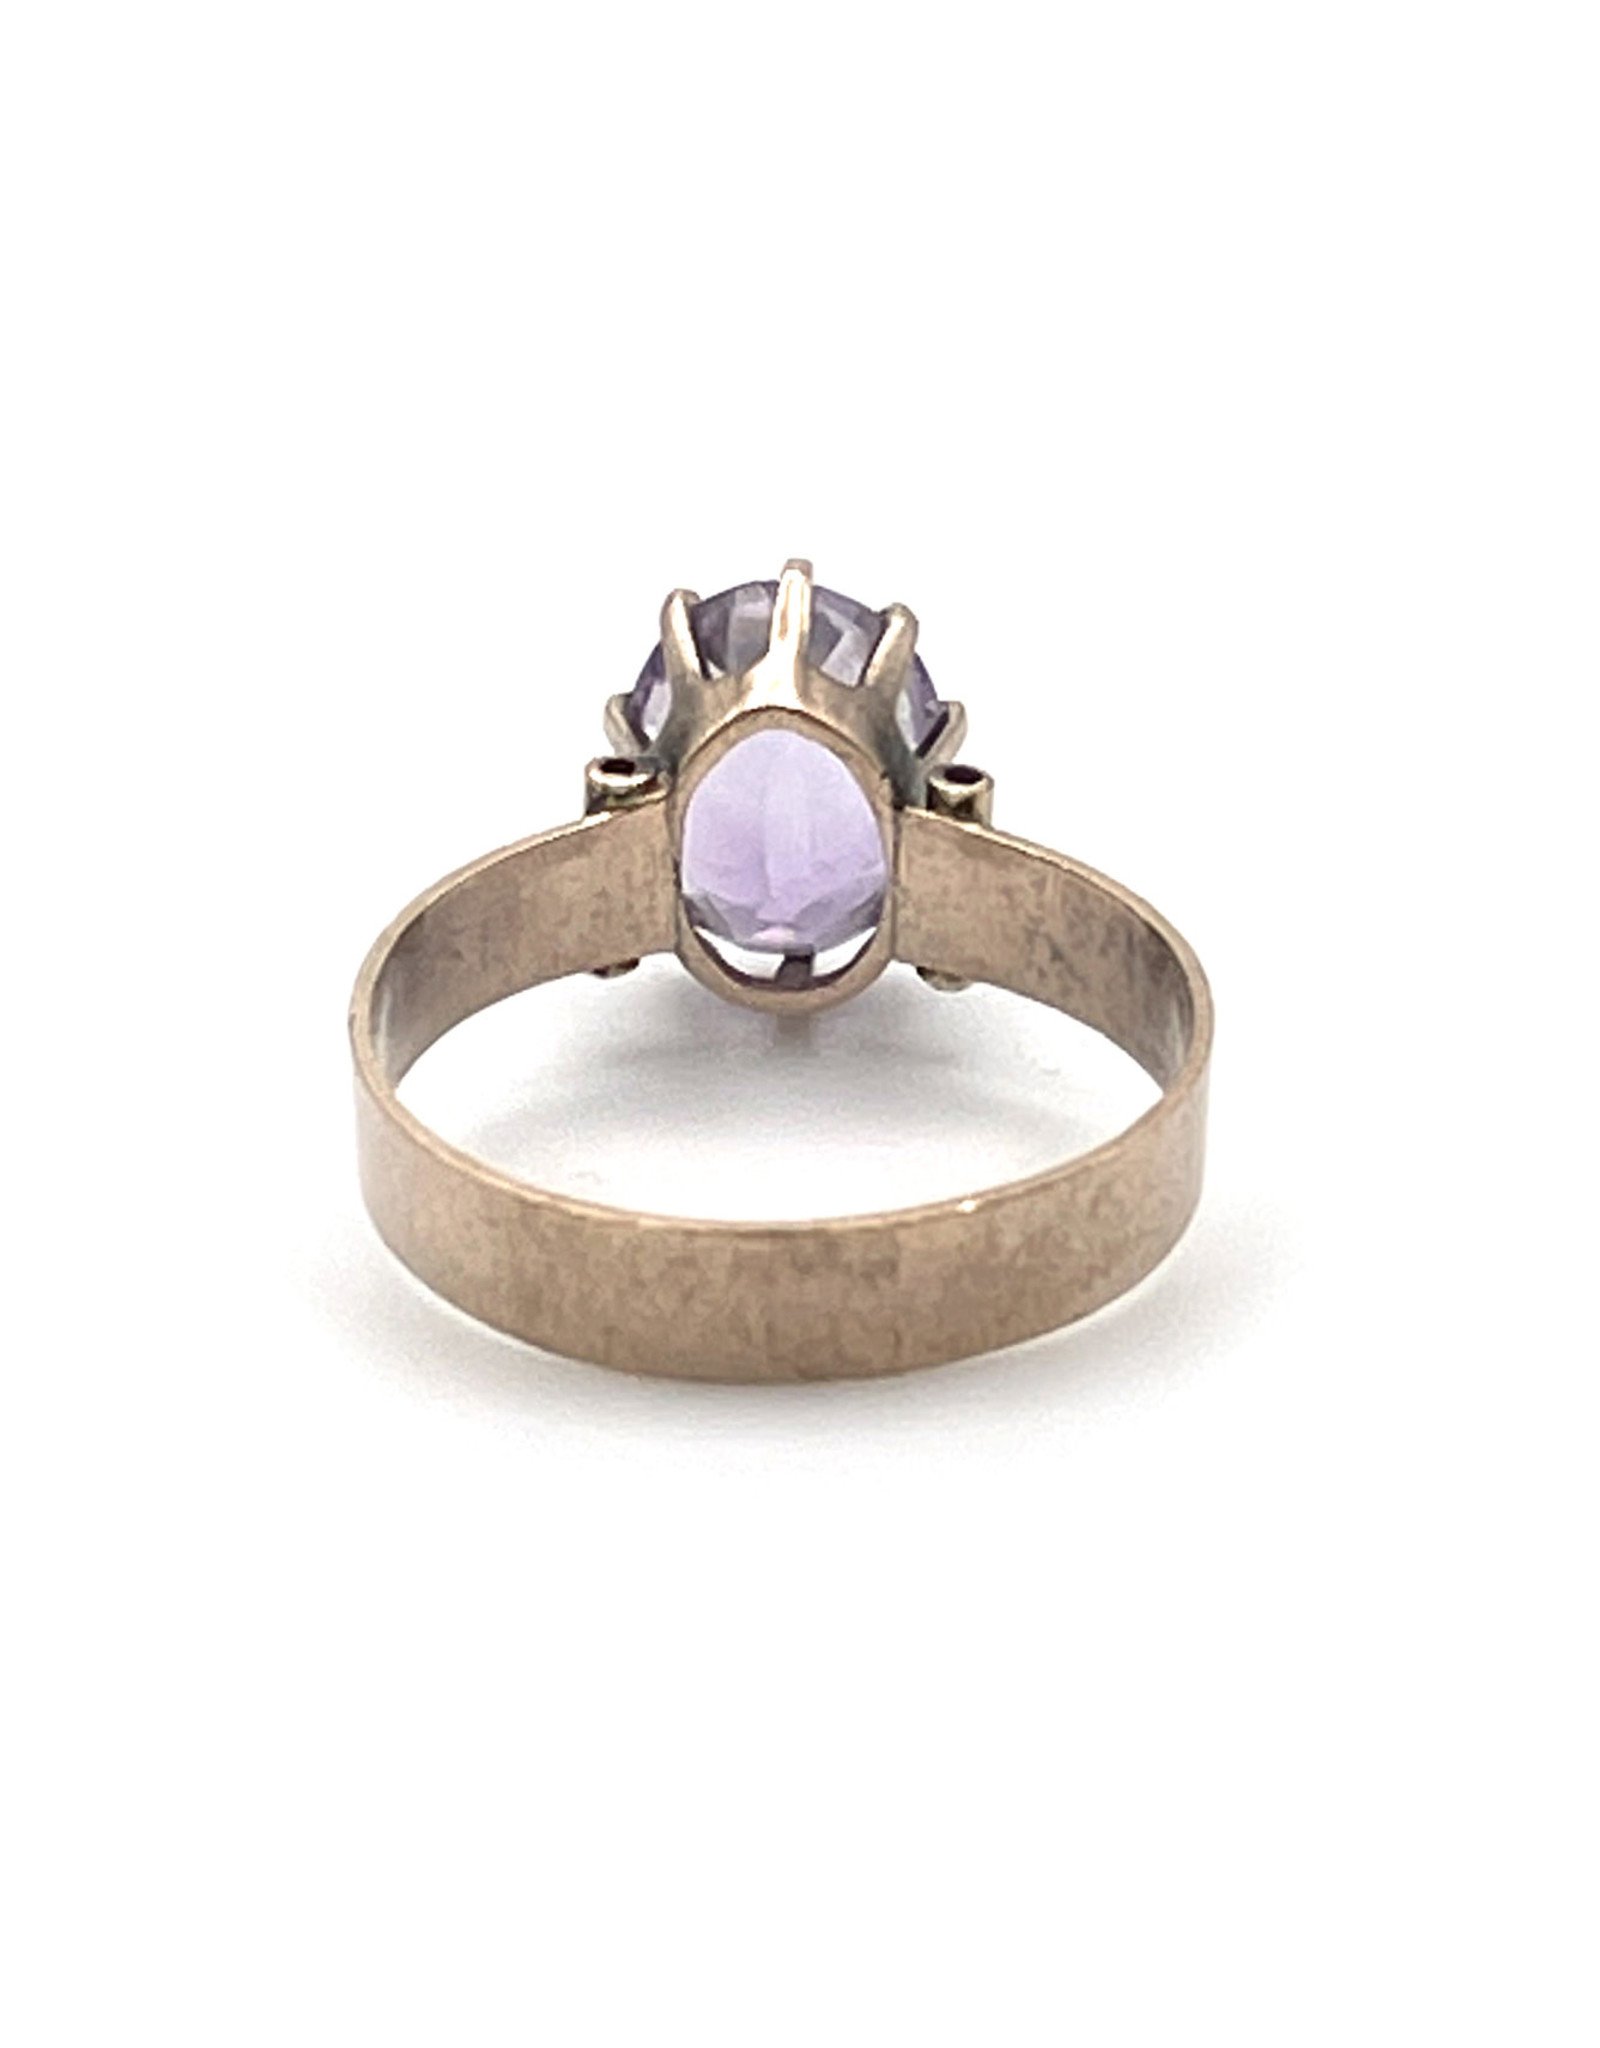 Size 7 Oval-Cut Amethyst 14K Rose Gold Ring with Geometric Floral Design